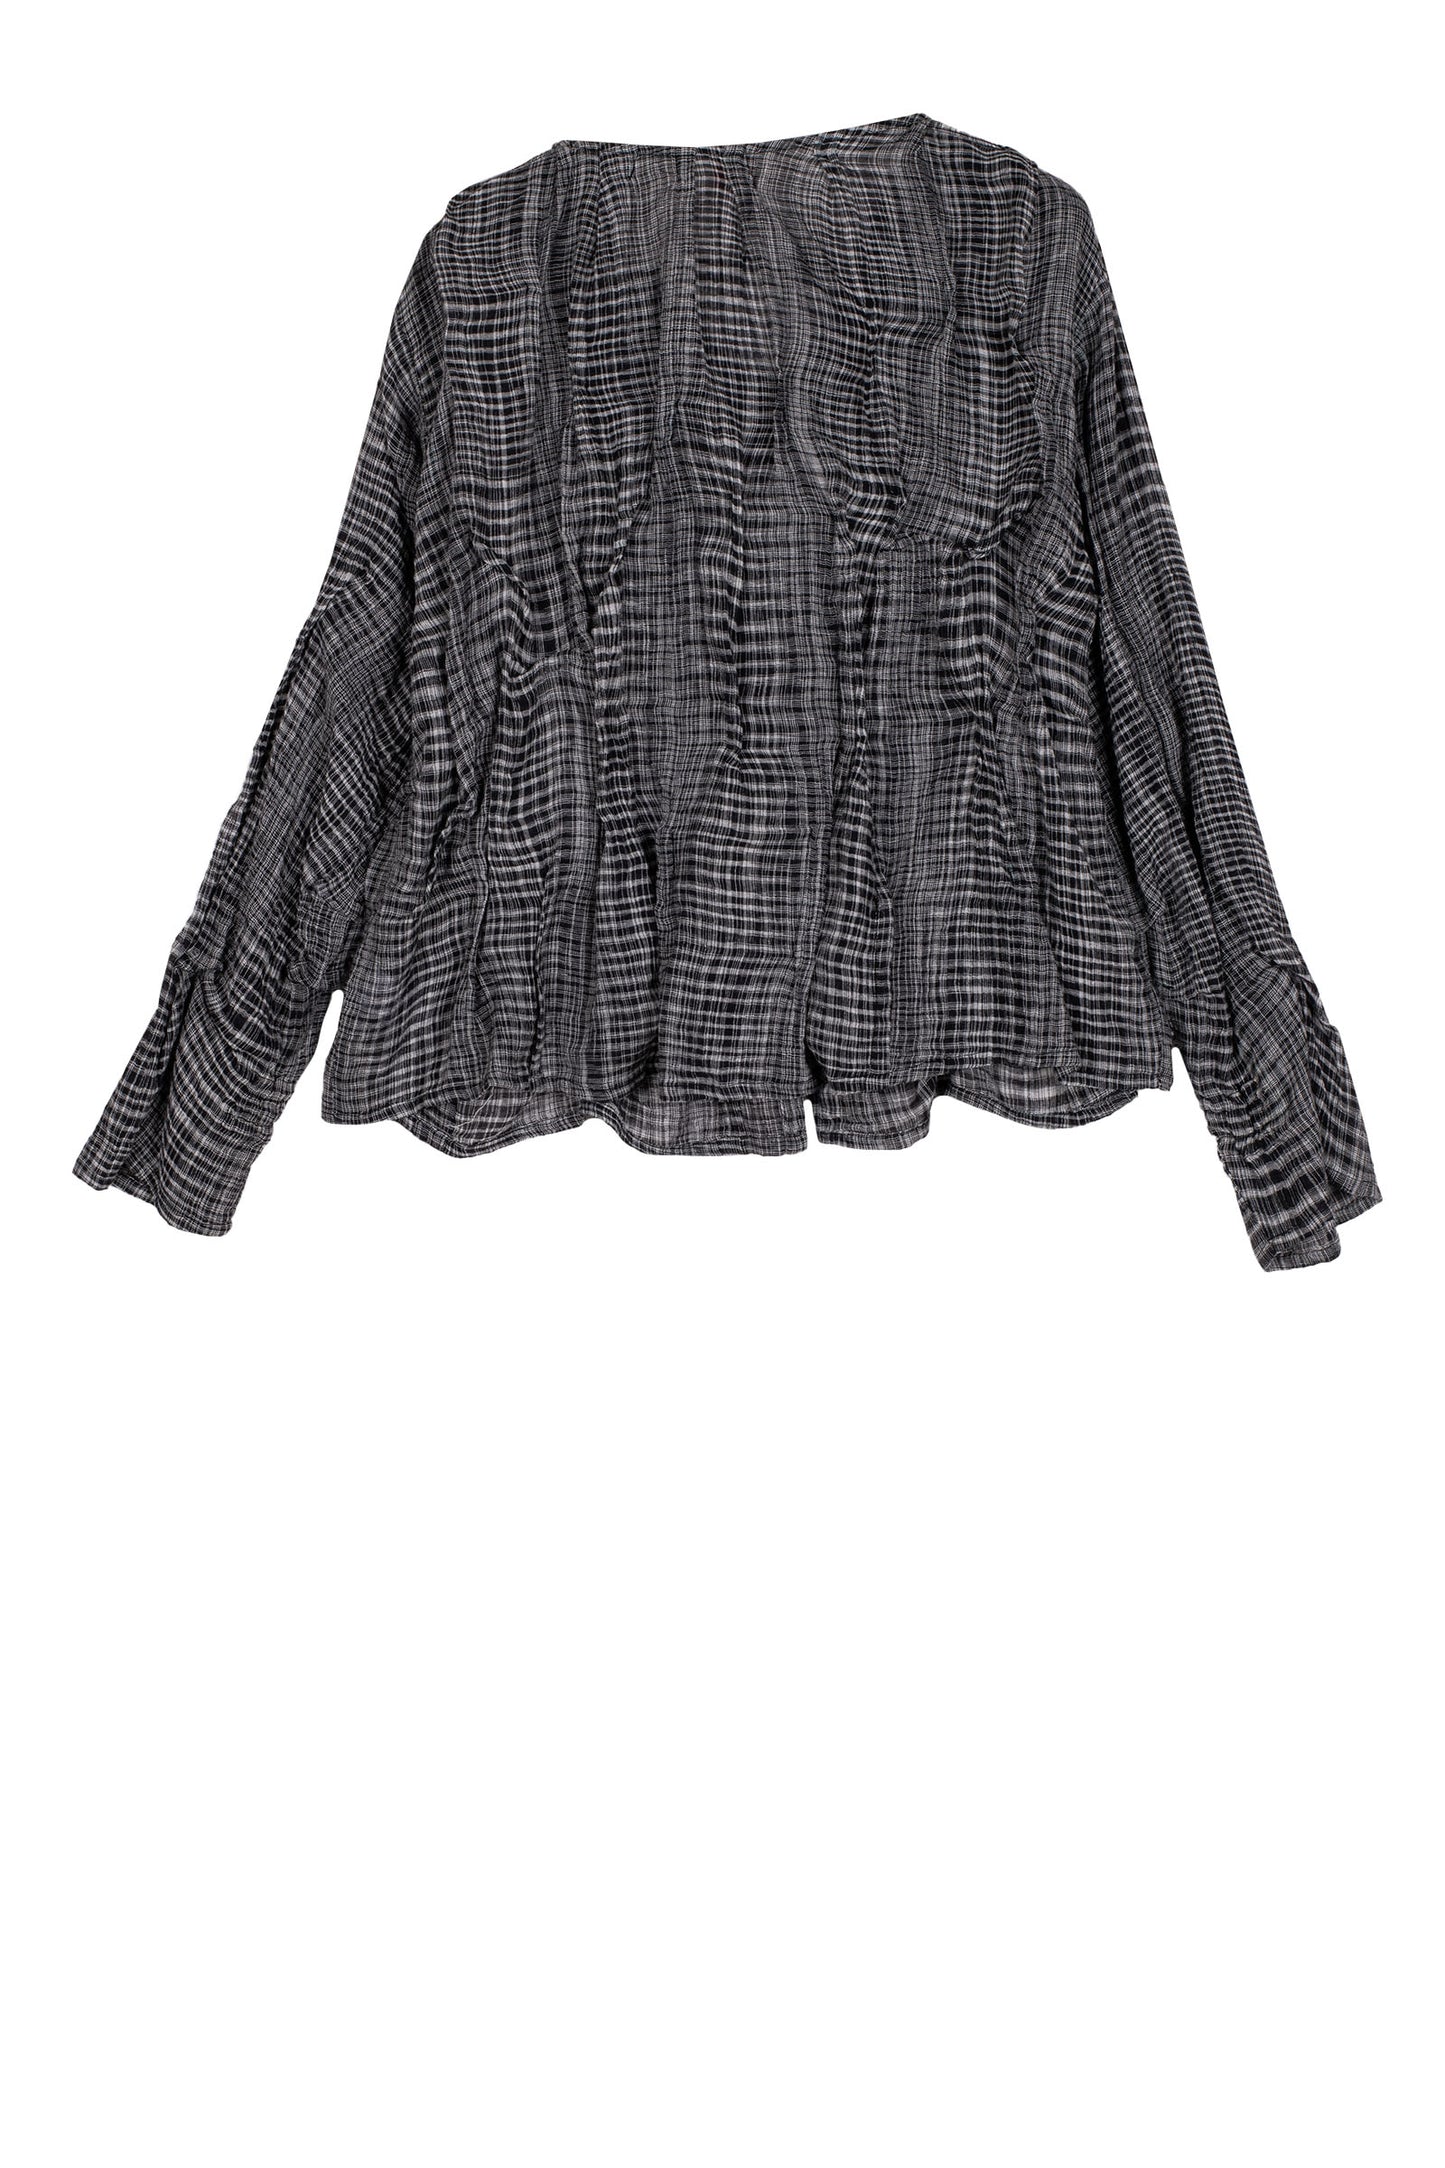 WOVEN TWO TONE COTTON WAVY TUCK V-NECK BLOUSE-NON DYED - wt1575-blk -